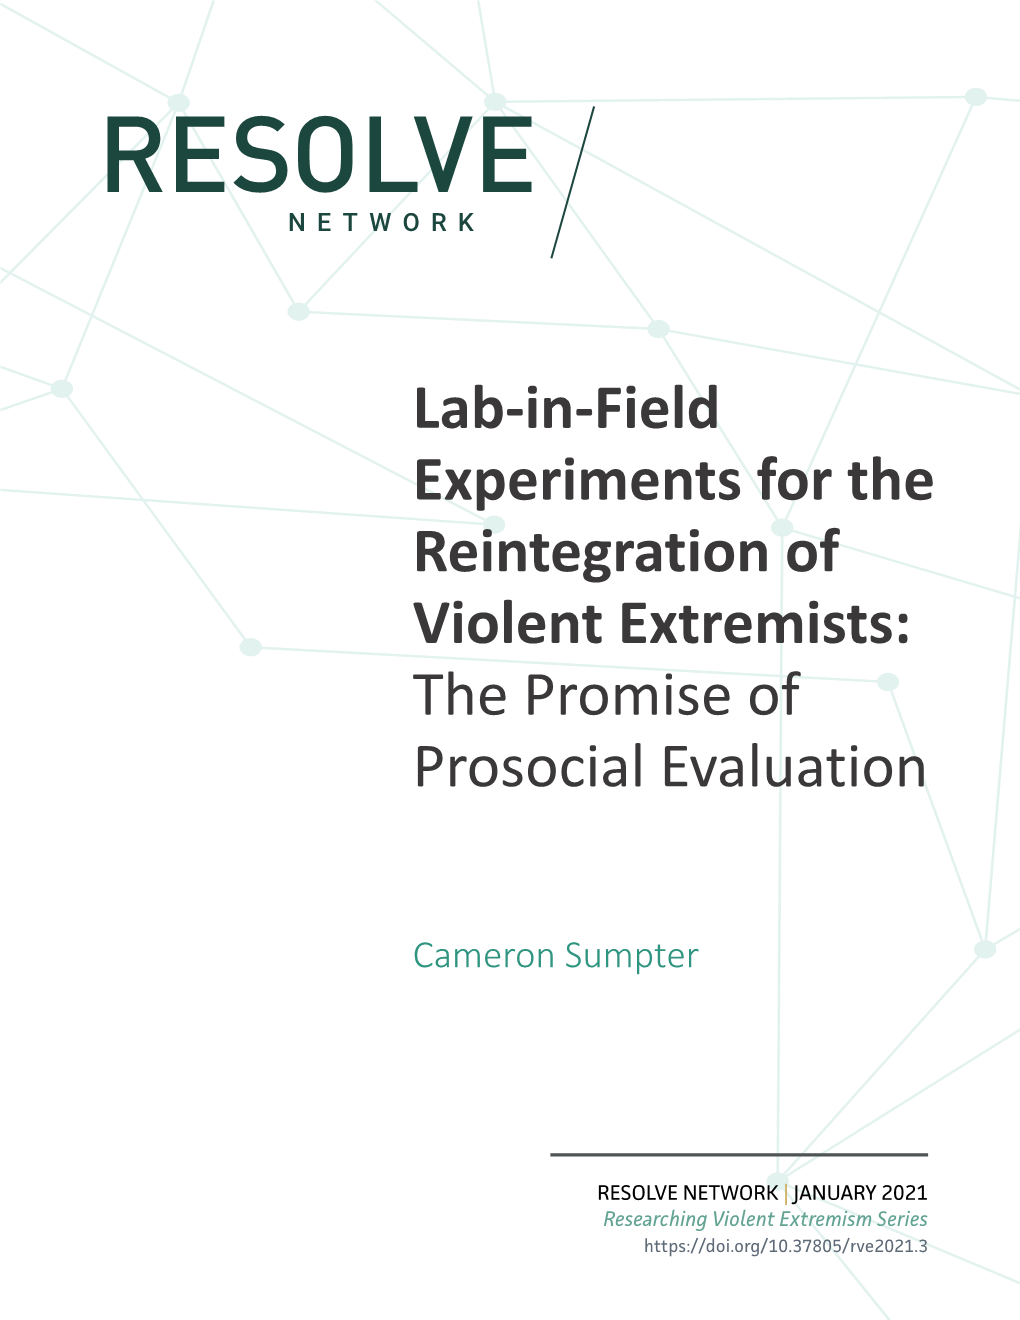 Lab-In-Field Experiments for the Reintegration of Violent Extremists: the Promise of Prosocial Evaluation